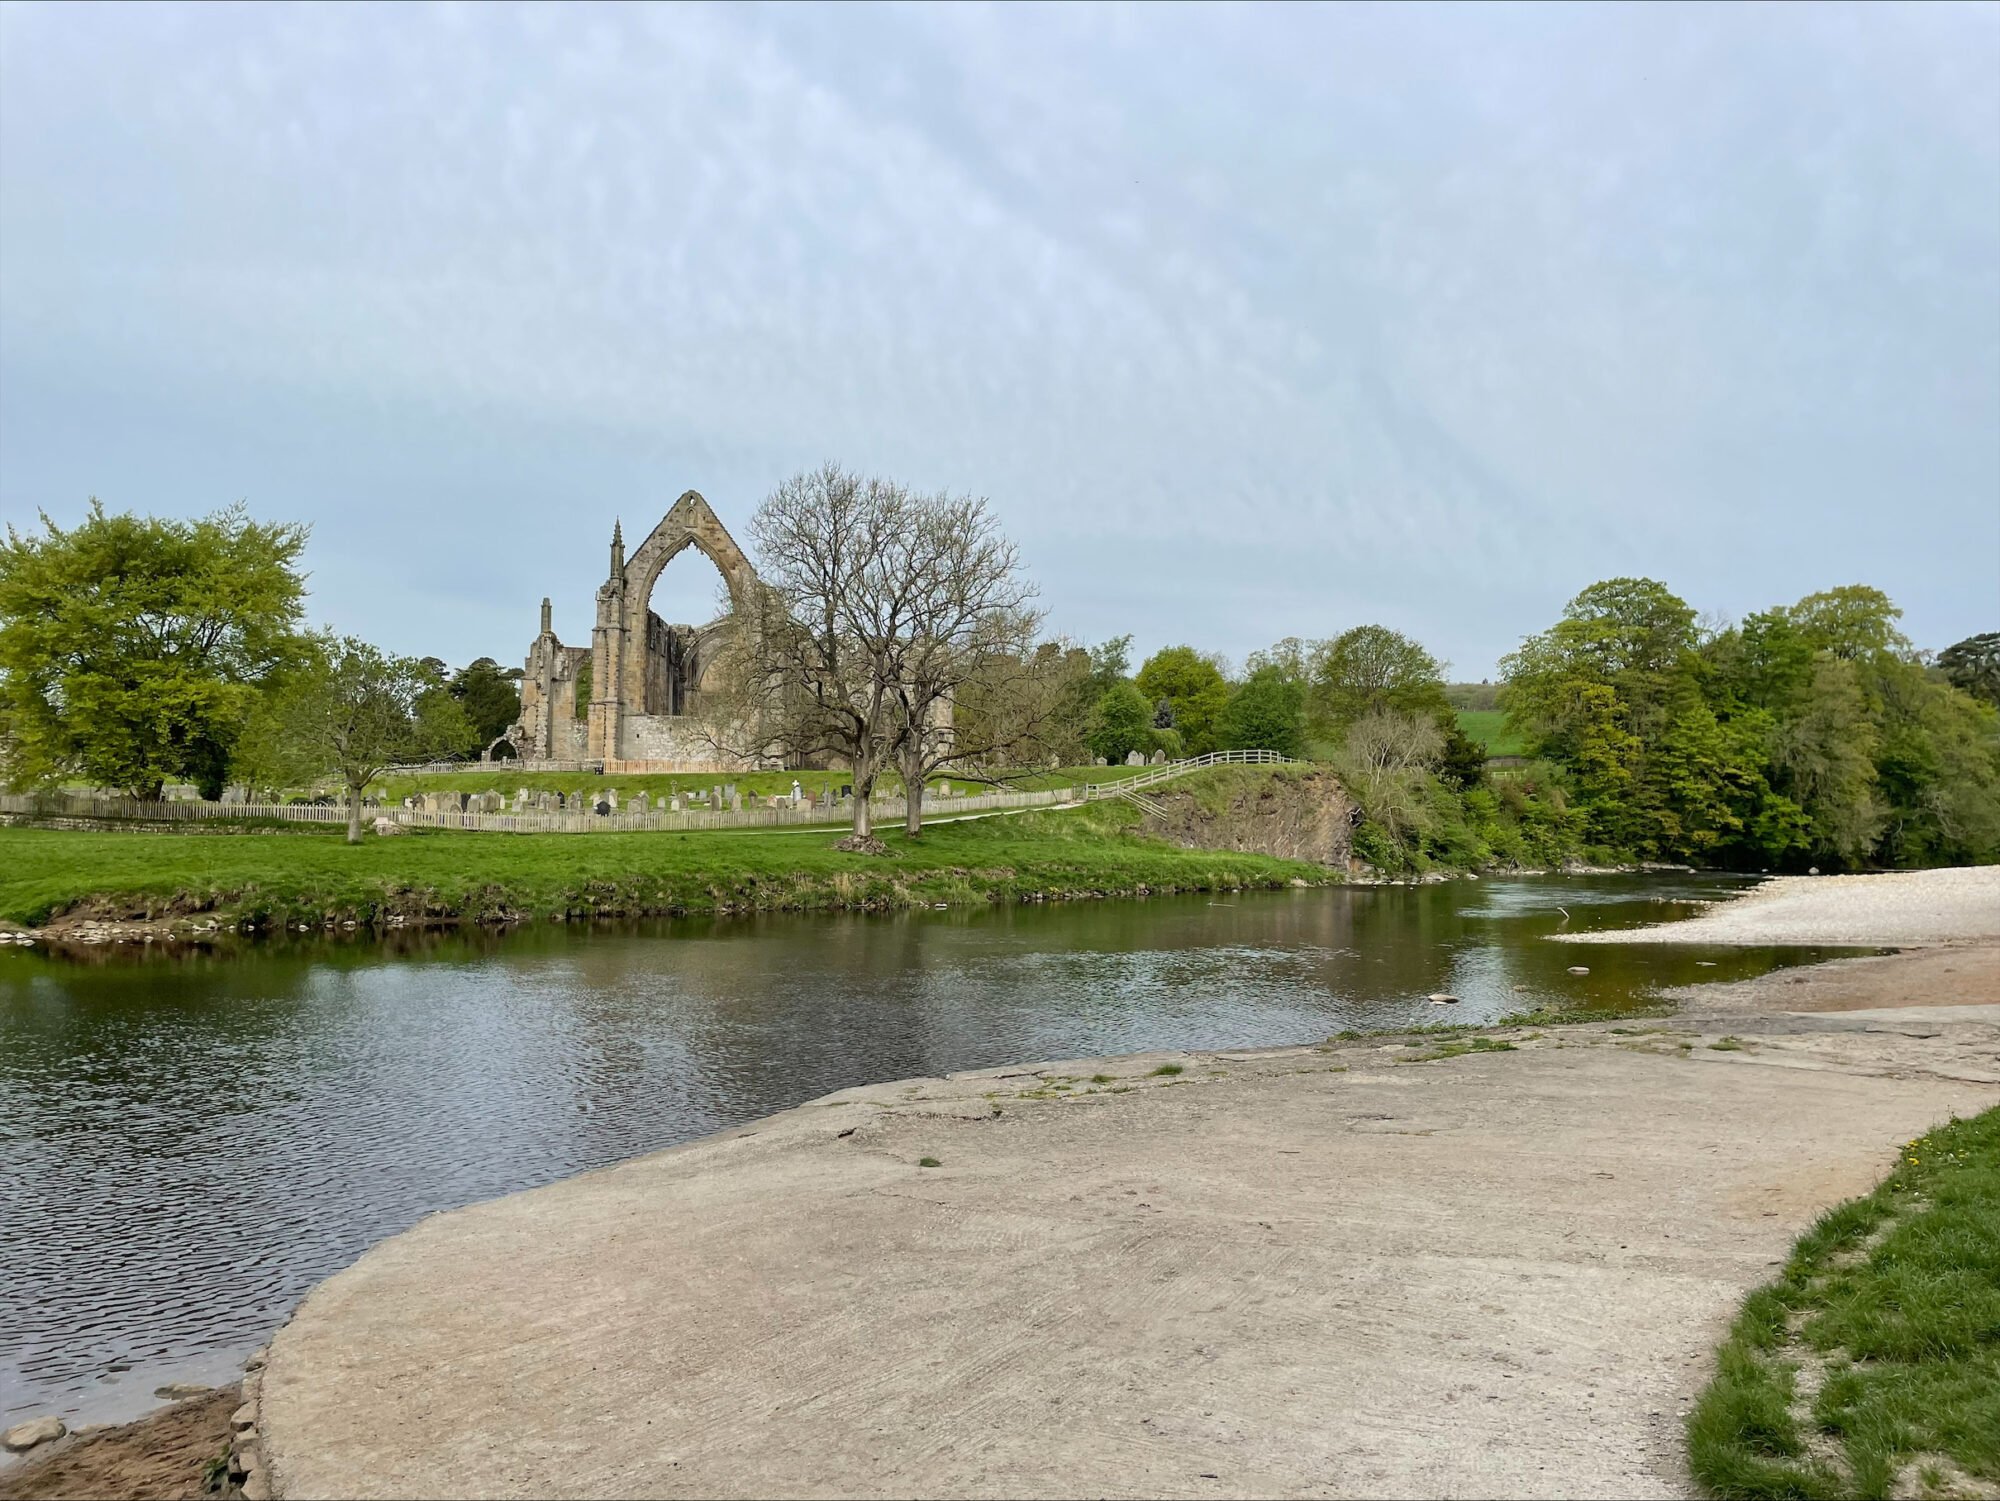 Find out more about the wonders of Bolton Abbey with TV historian, Dr Emma Wells